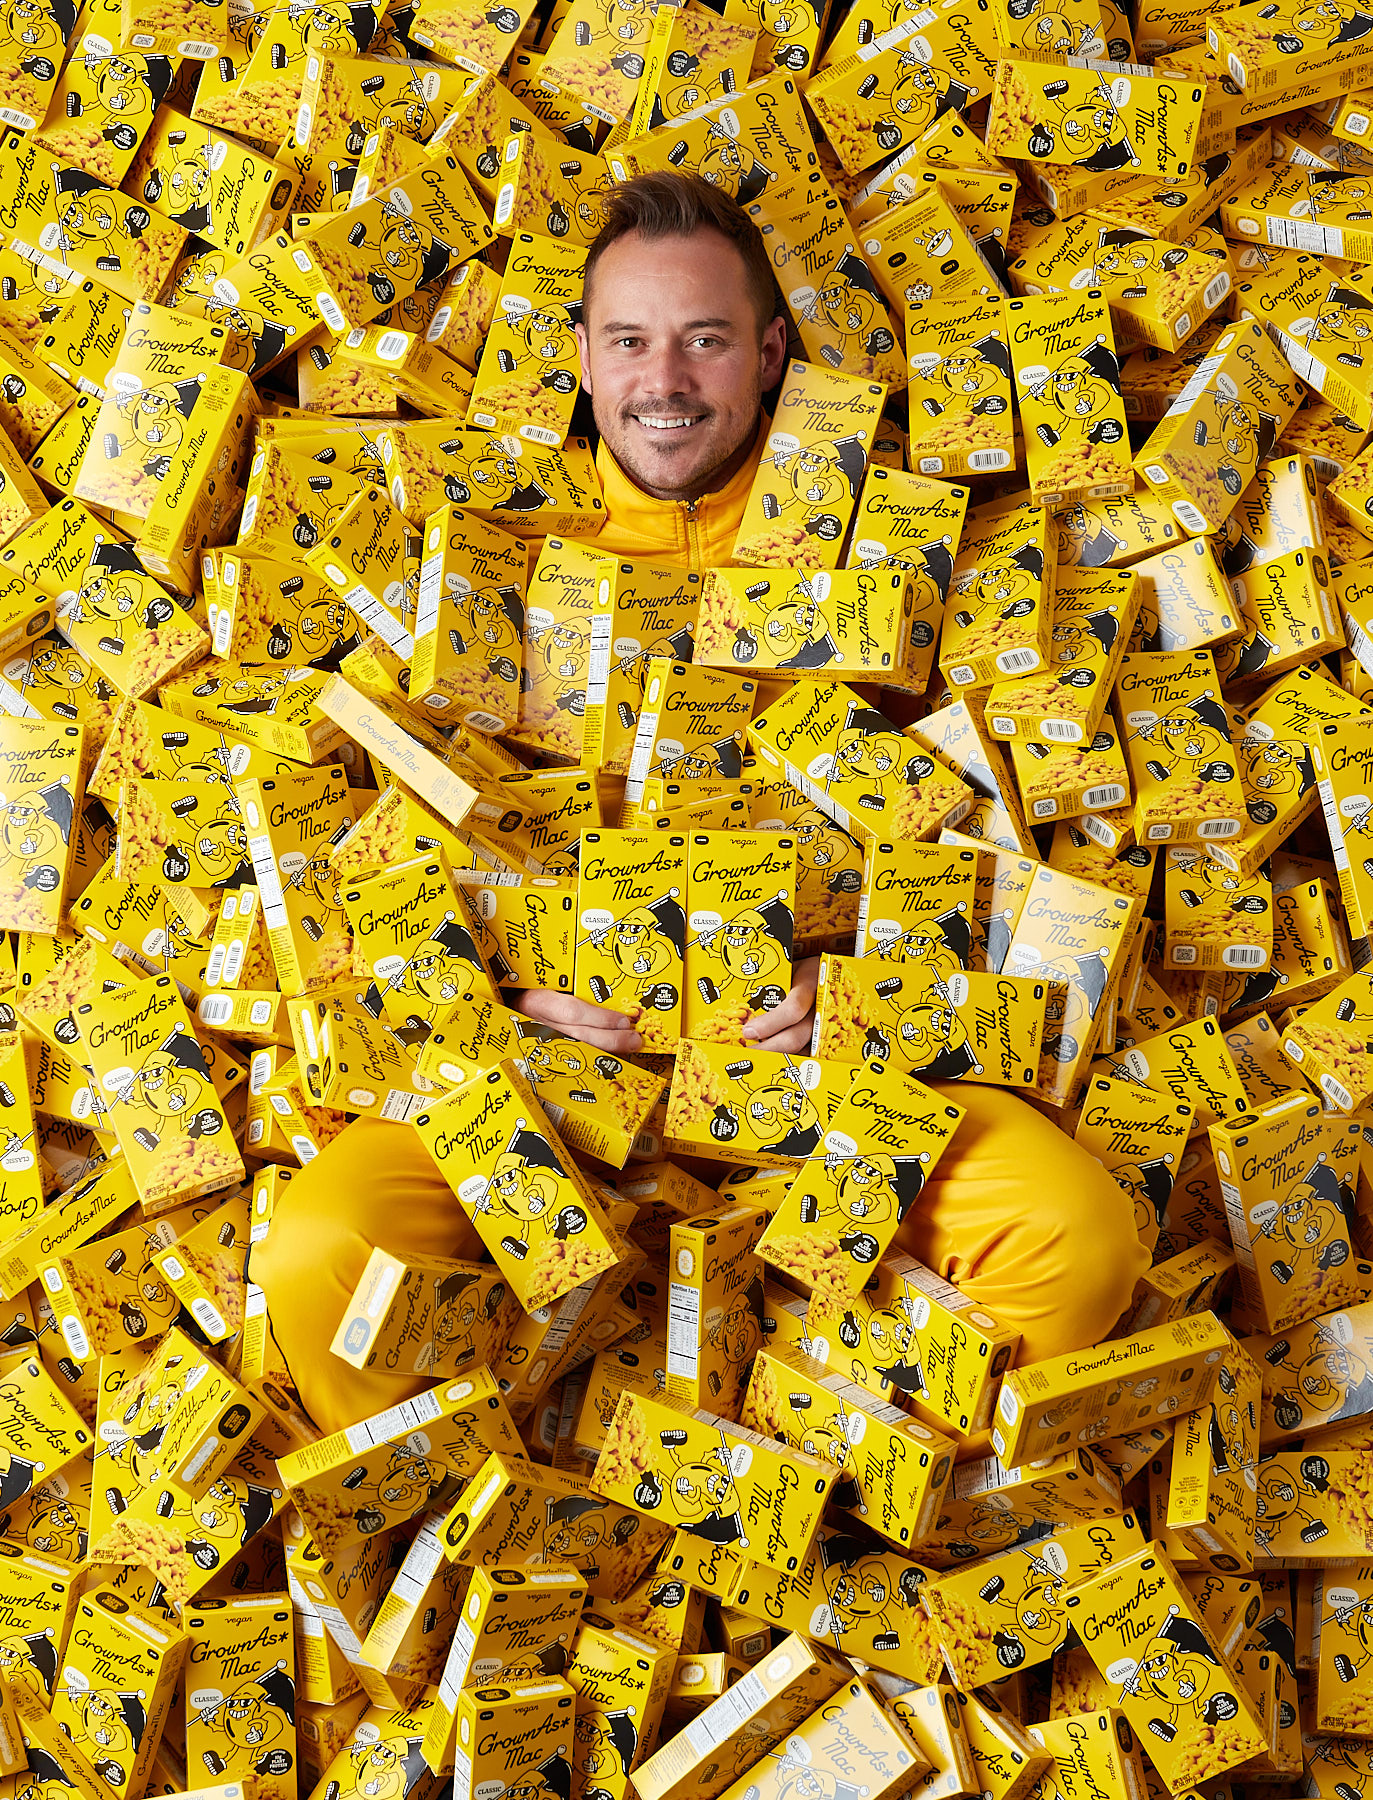 Portrait of man in pit of mac and cheese boxes